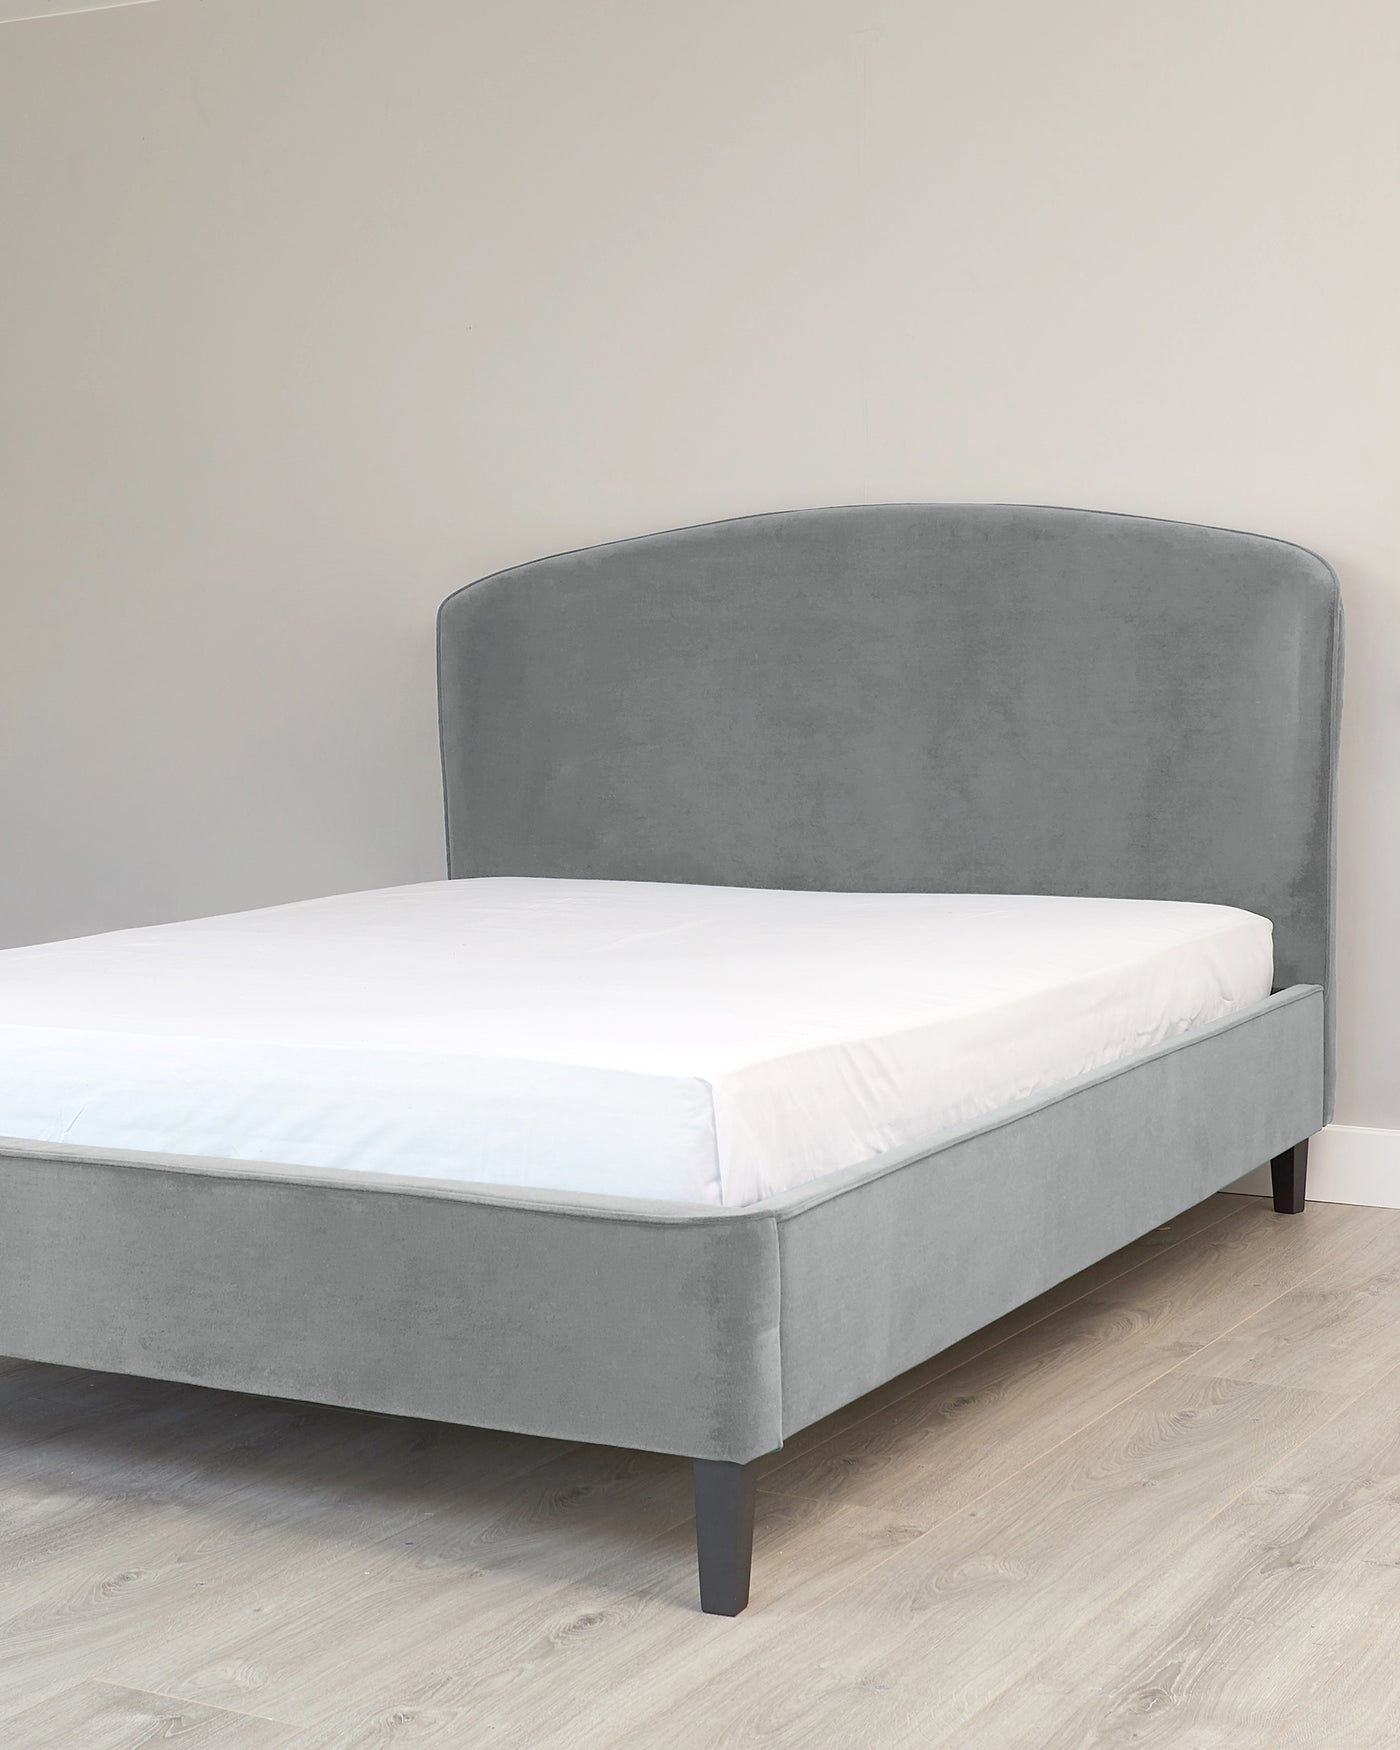 Grey upholstered platform bed with a curved headboard and simple dark wooden legs, showcased in a room with light wooden flooring and a neutral wall. A white mattress is placed on top of the bed frame.